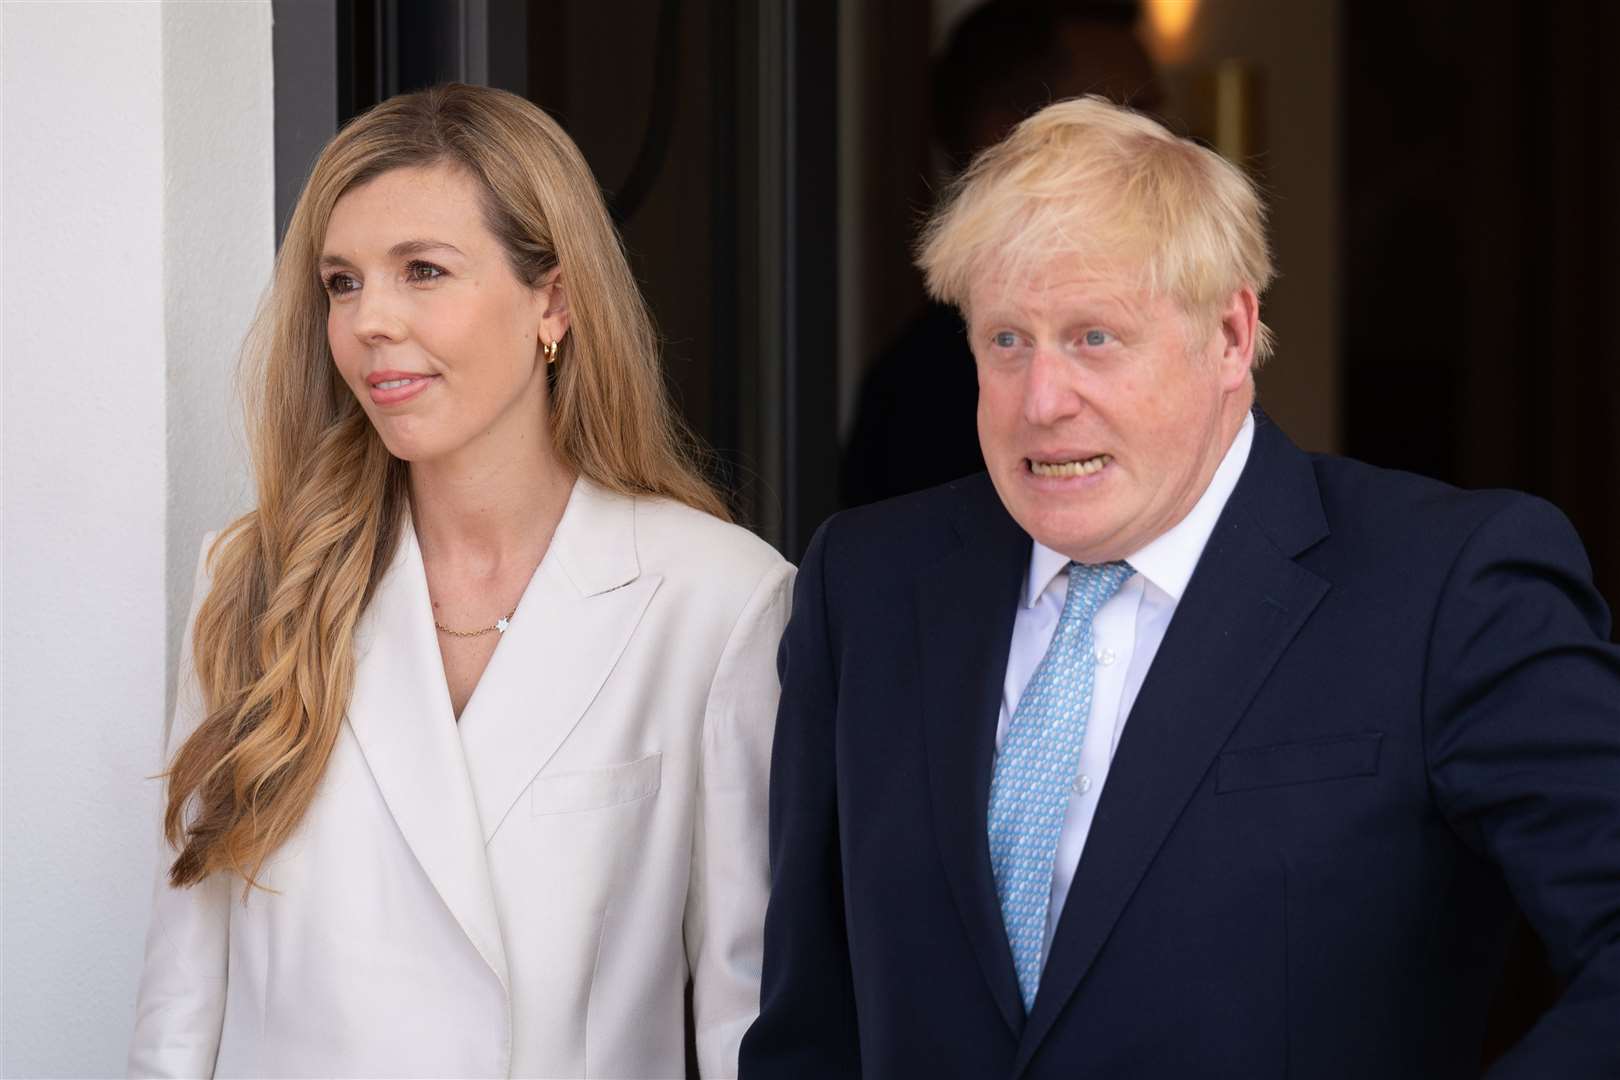 Prime Minister Boris Johnson and his wife Carrie at the G7 summit in Schloss Elmau (Stefan Rousseau/PA)